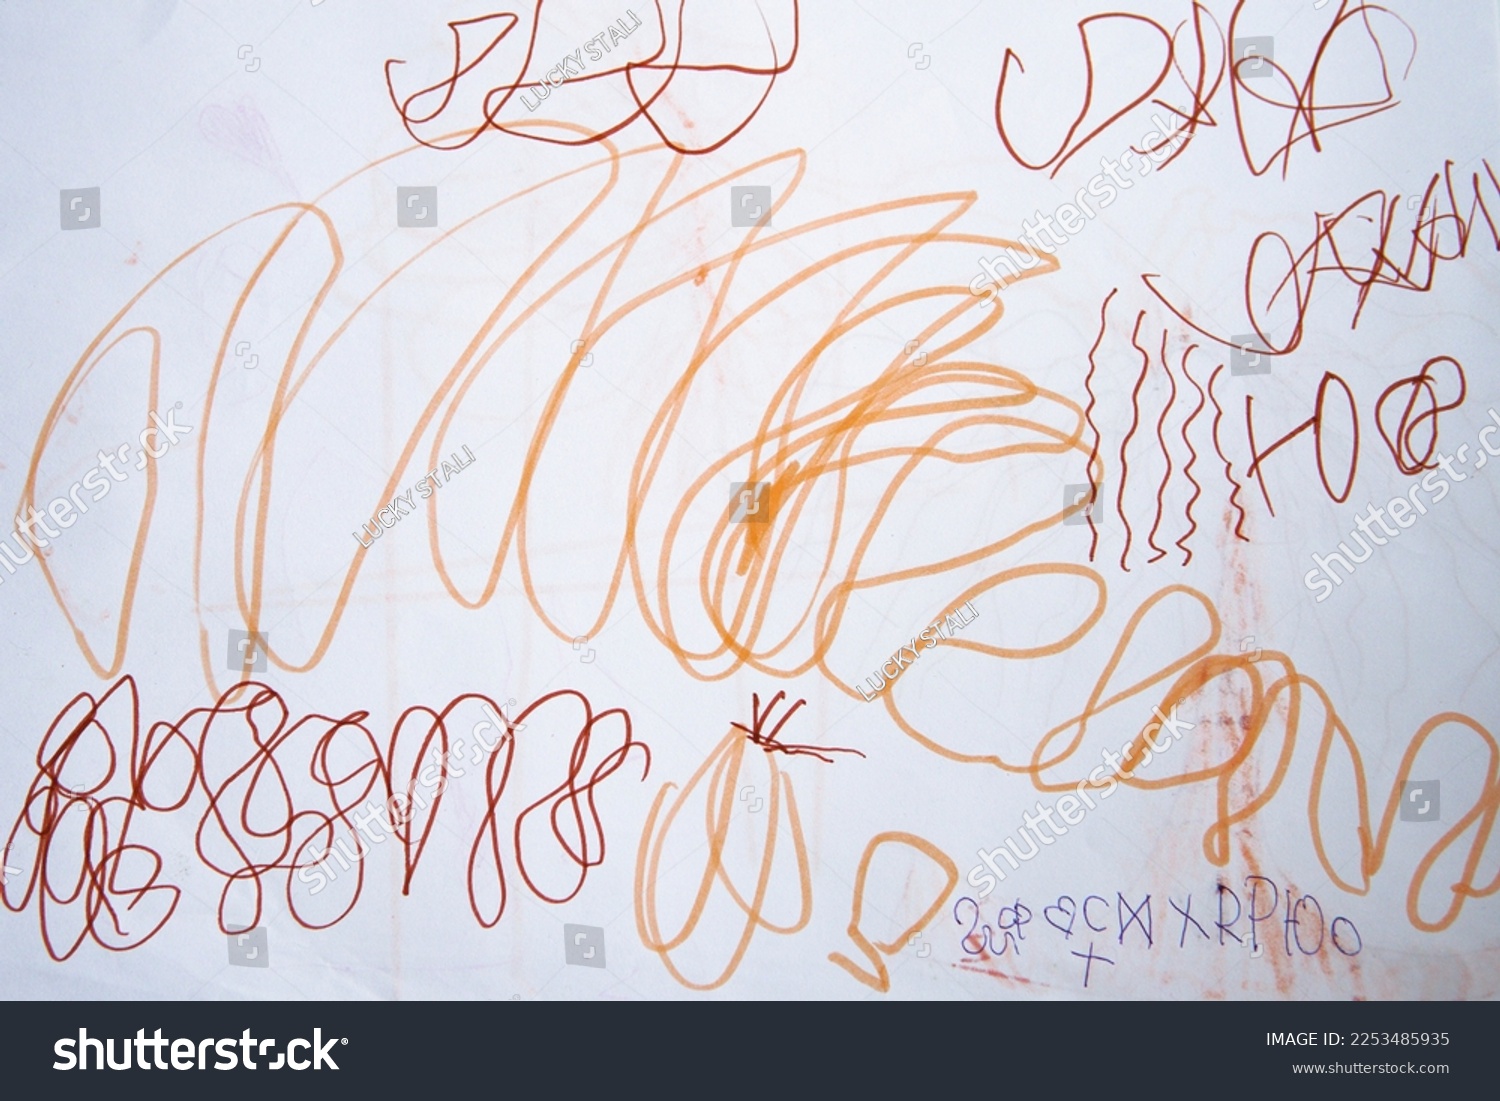 Children draw doodles. Multicolored bright chaotic lines. Prints for clothes, art, background for design #2253485935